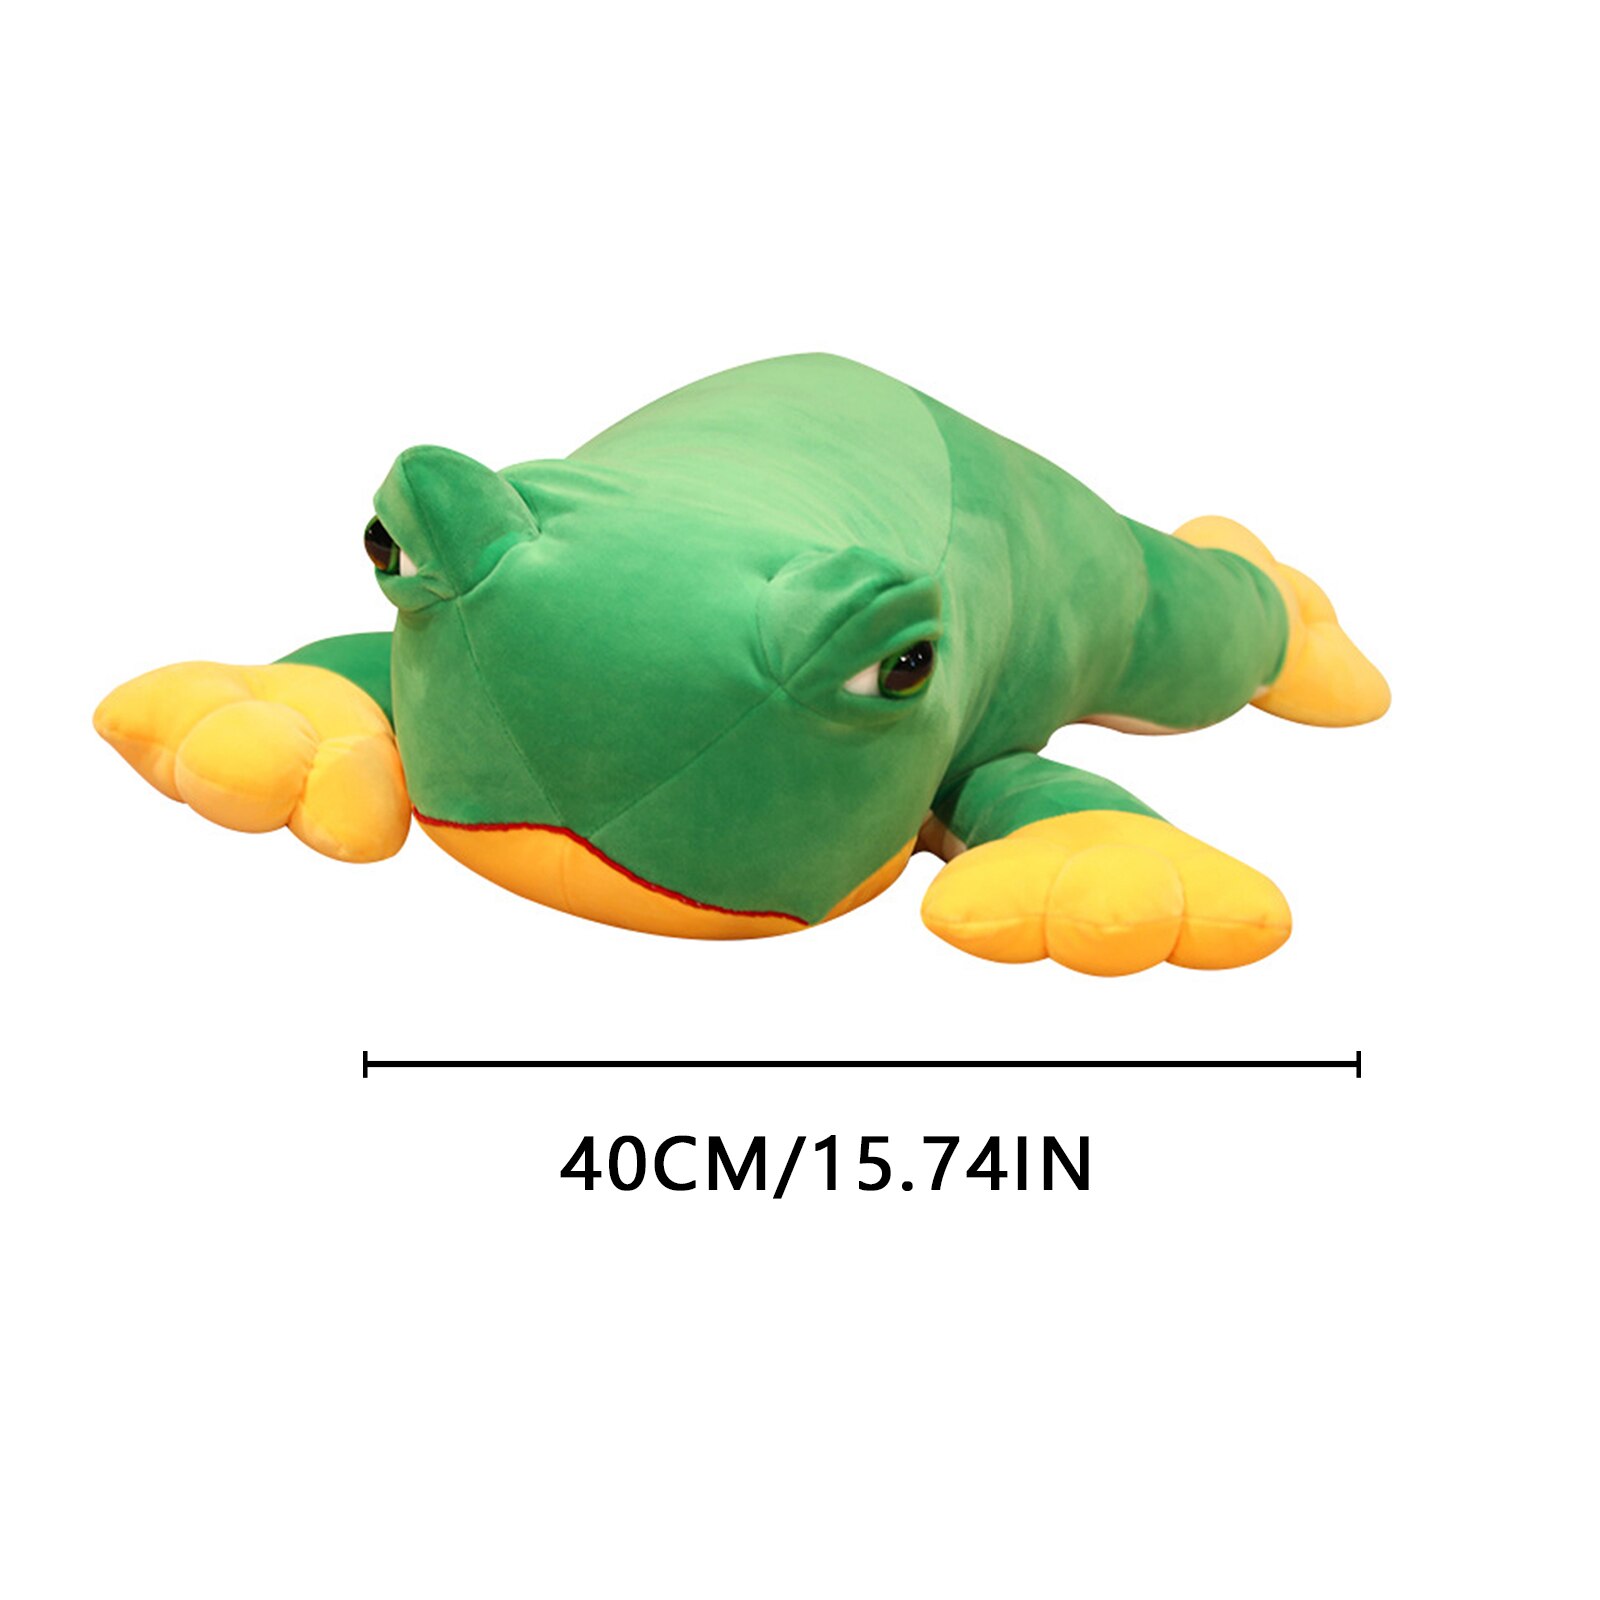 New 40CM Stuffed Animal Frog Throw Plush Pillow Doll Soft Fluffy Hugging Cushion Present For Every 4